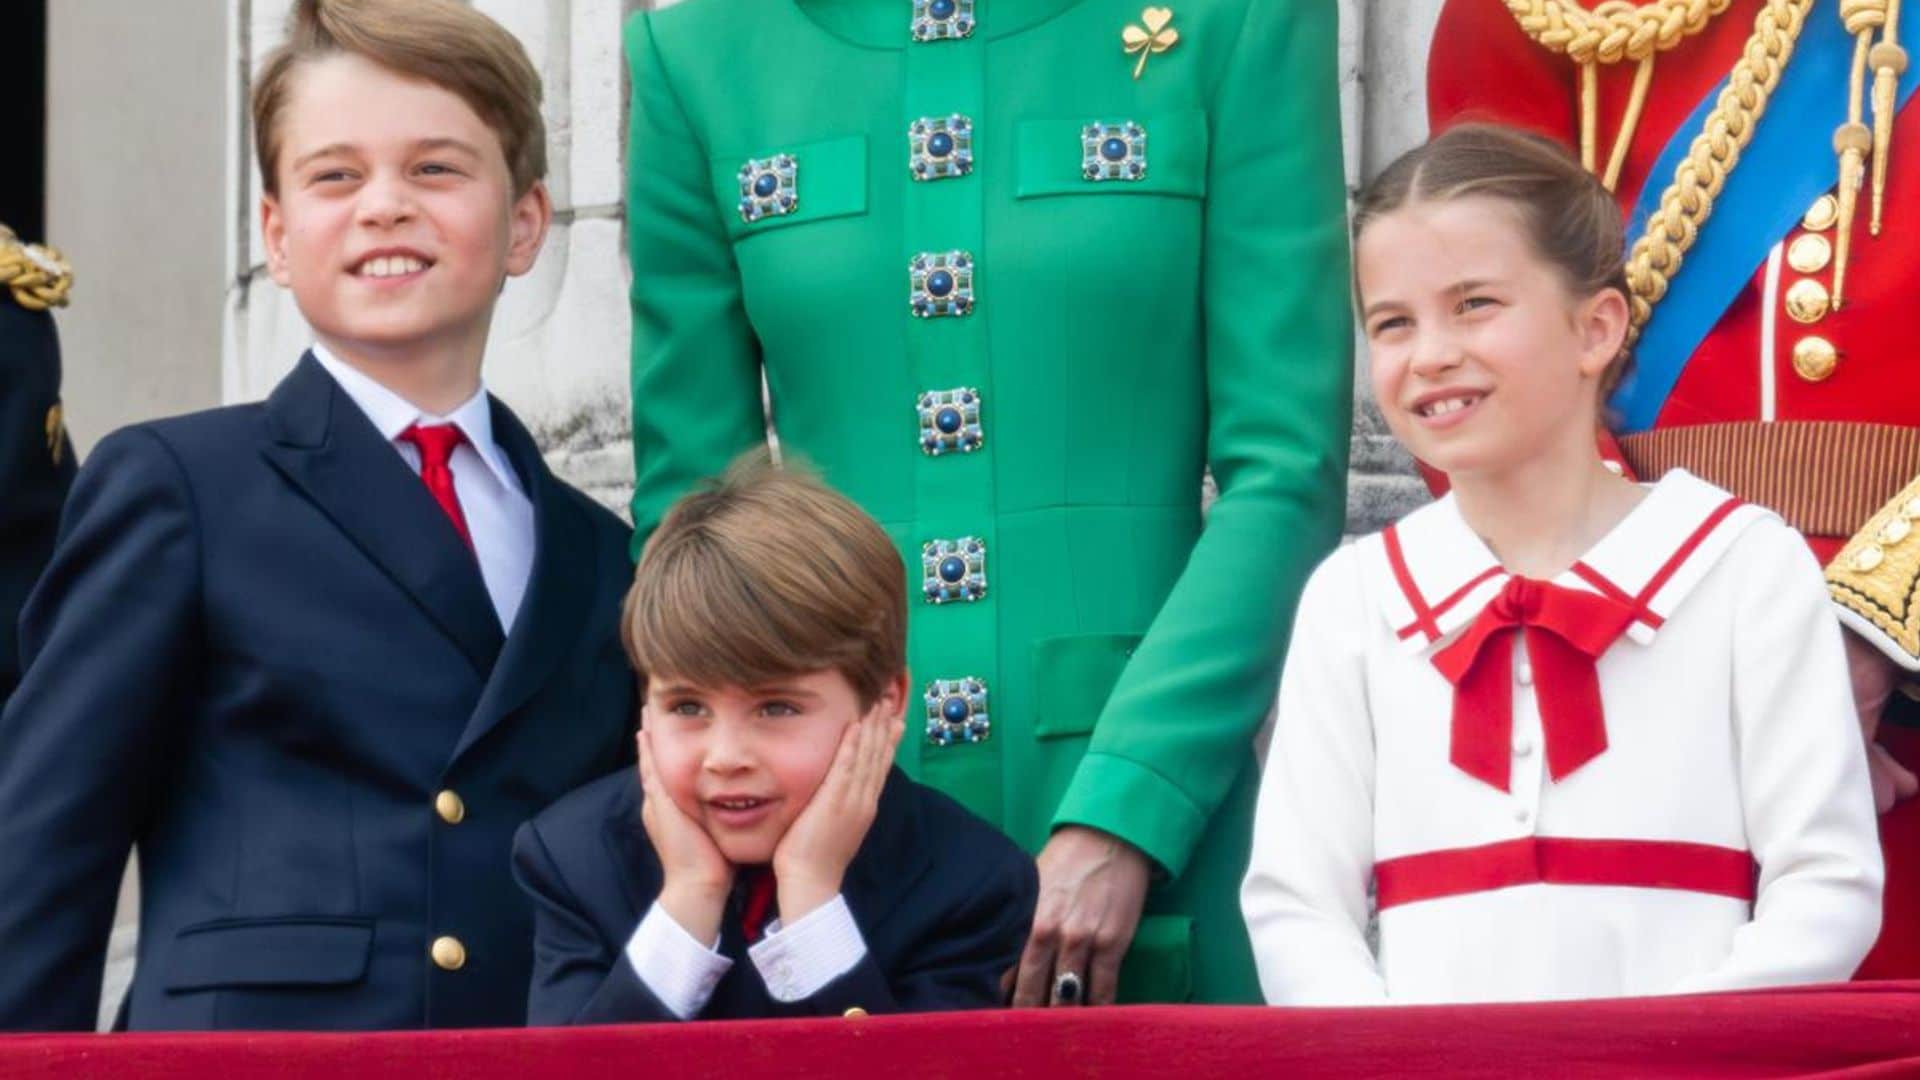 The Princess of Wales' kids have been 'very hands-on' following her return home: report